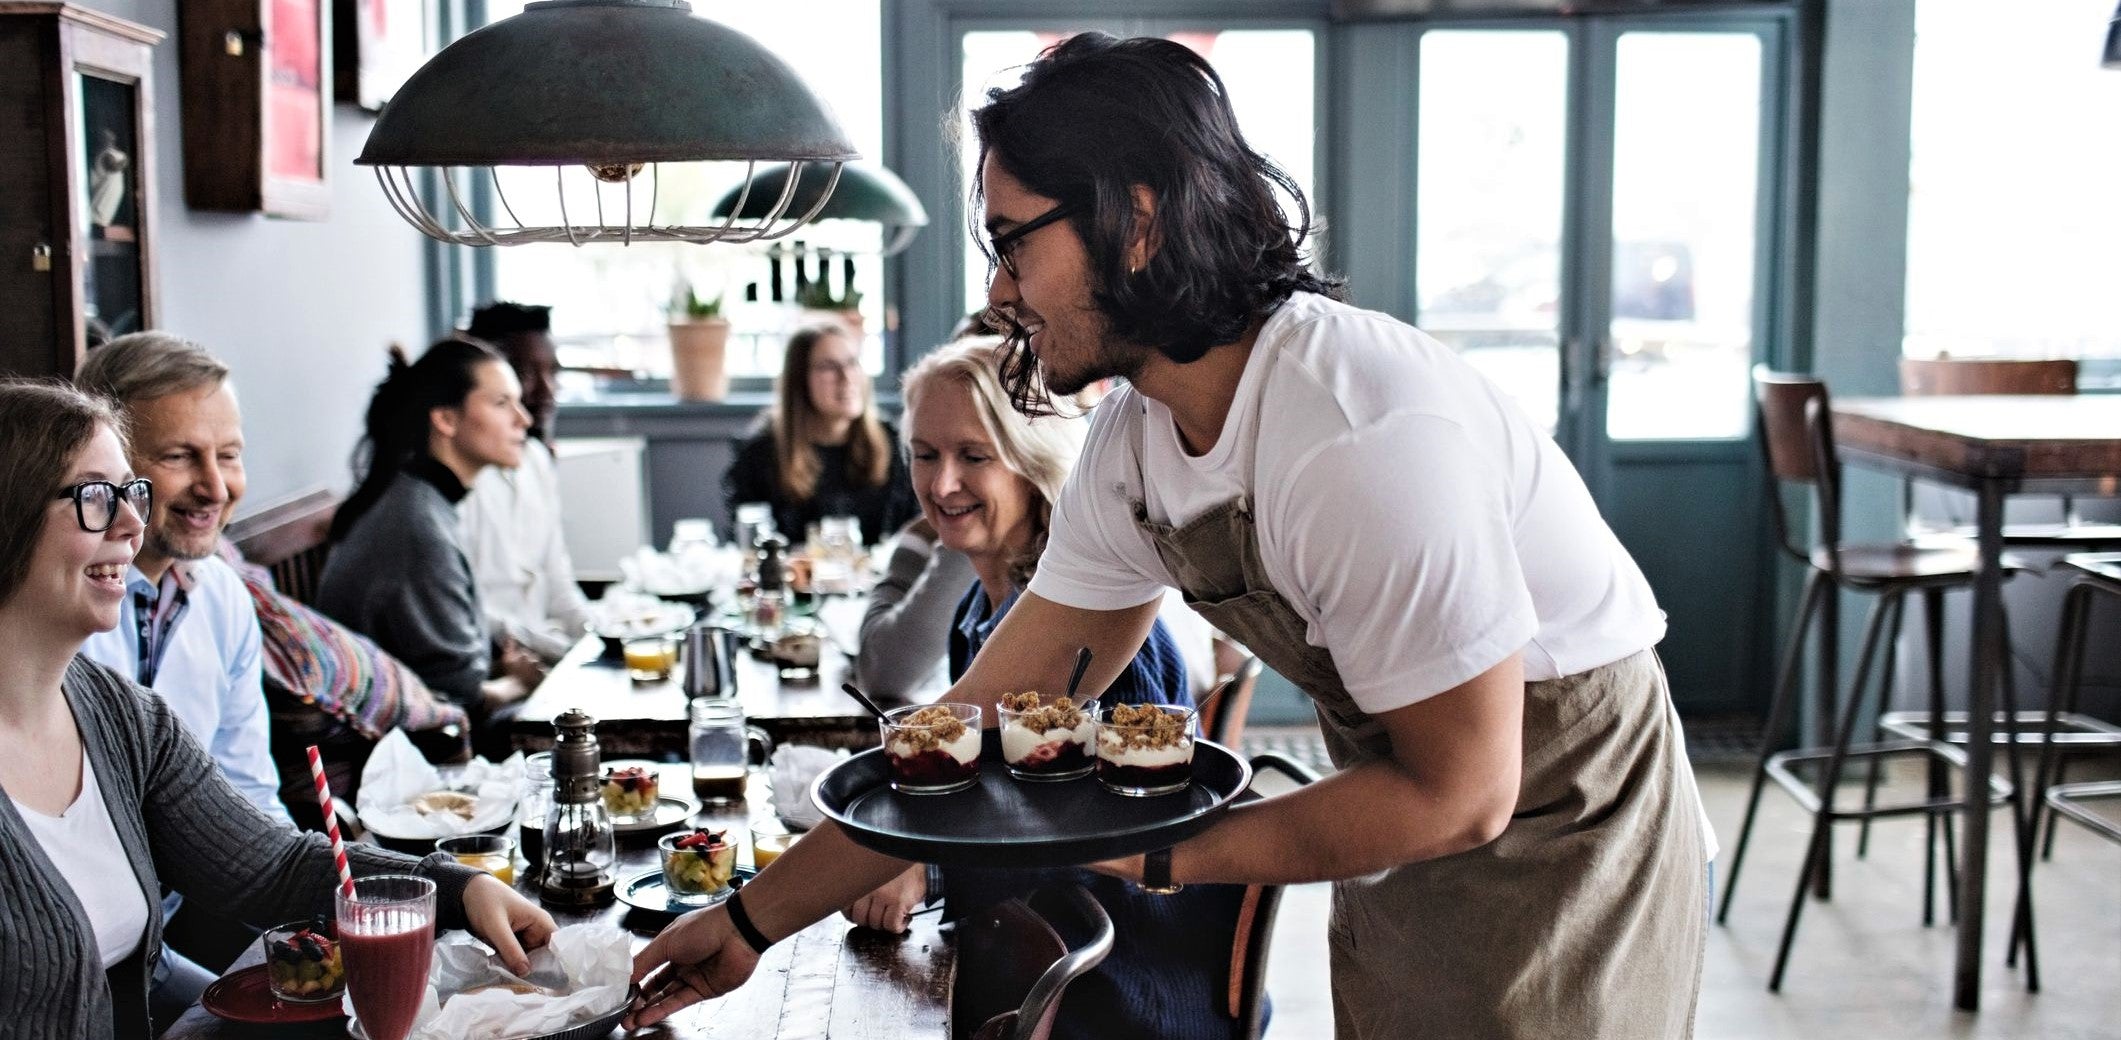 attractive young waiter with long hair and glasses delivers tray of desserts to table of smiling repeat customers